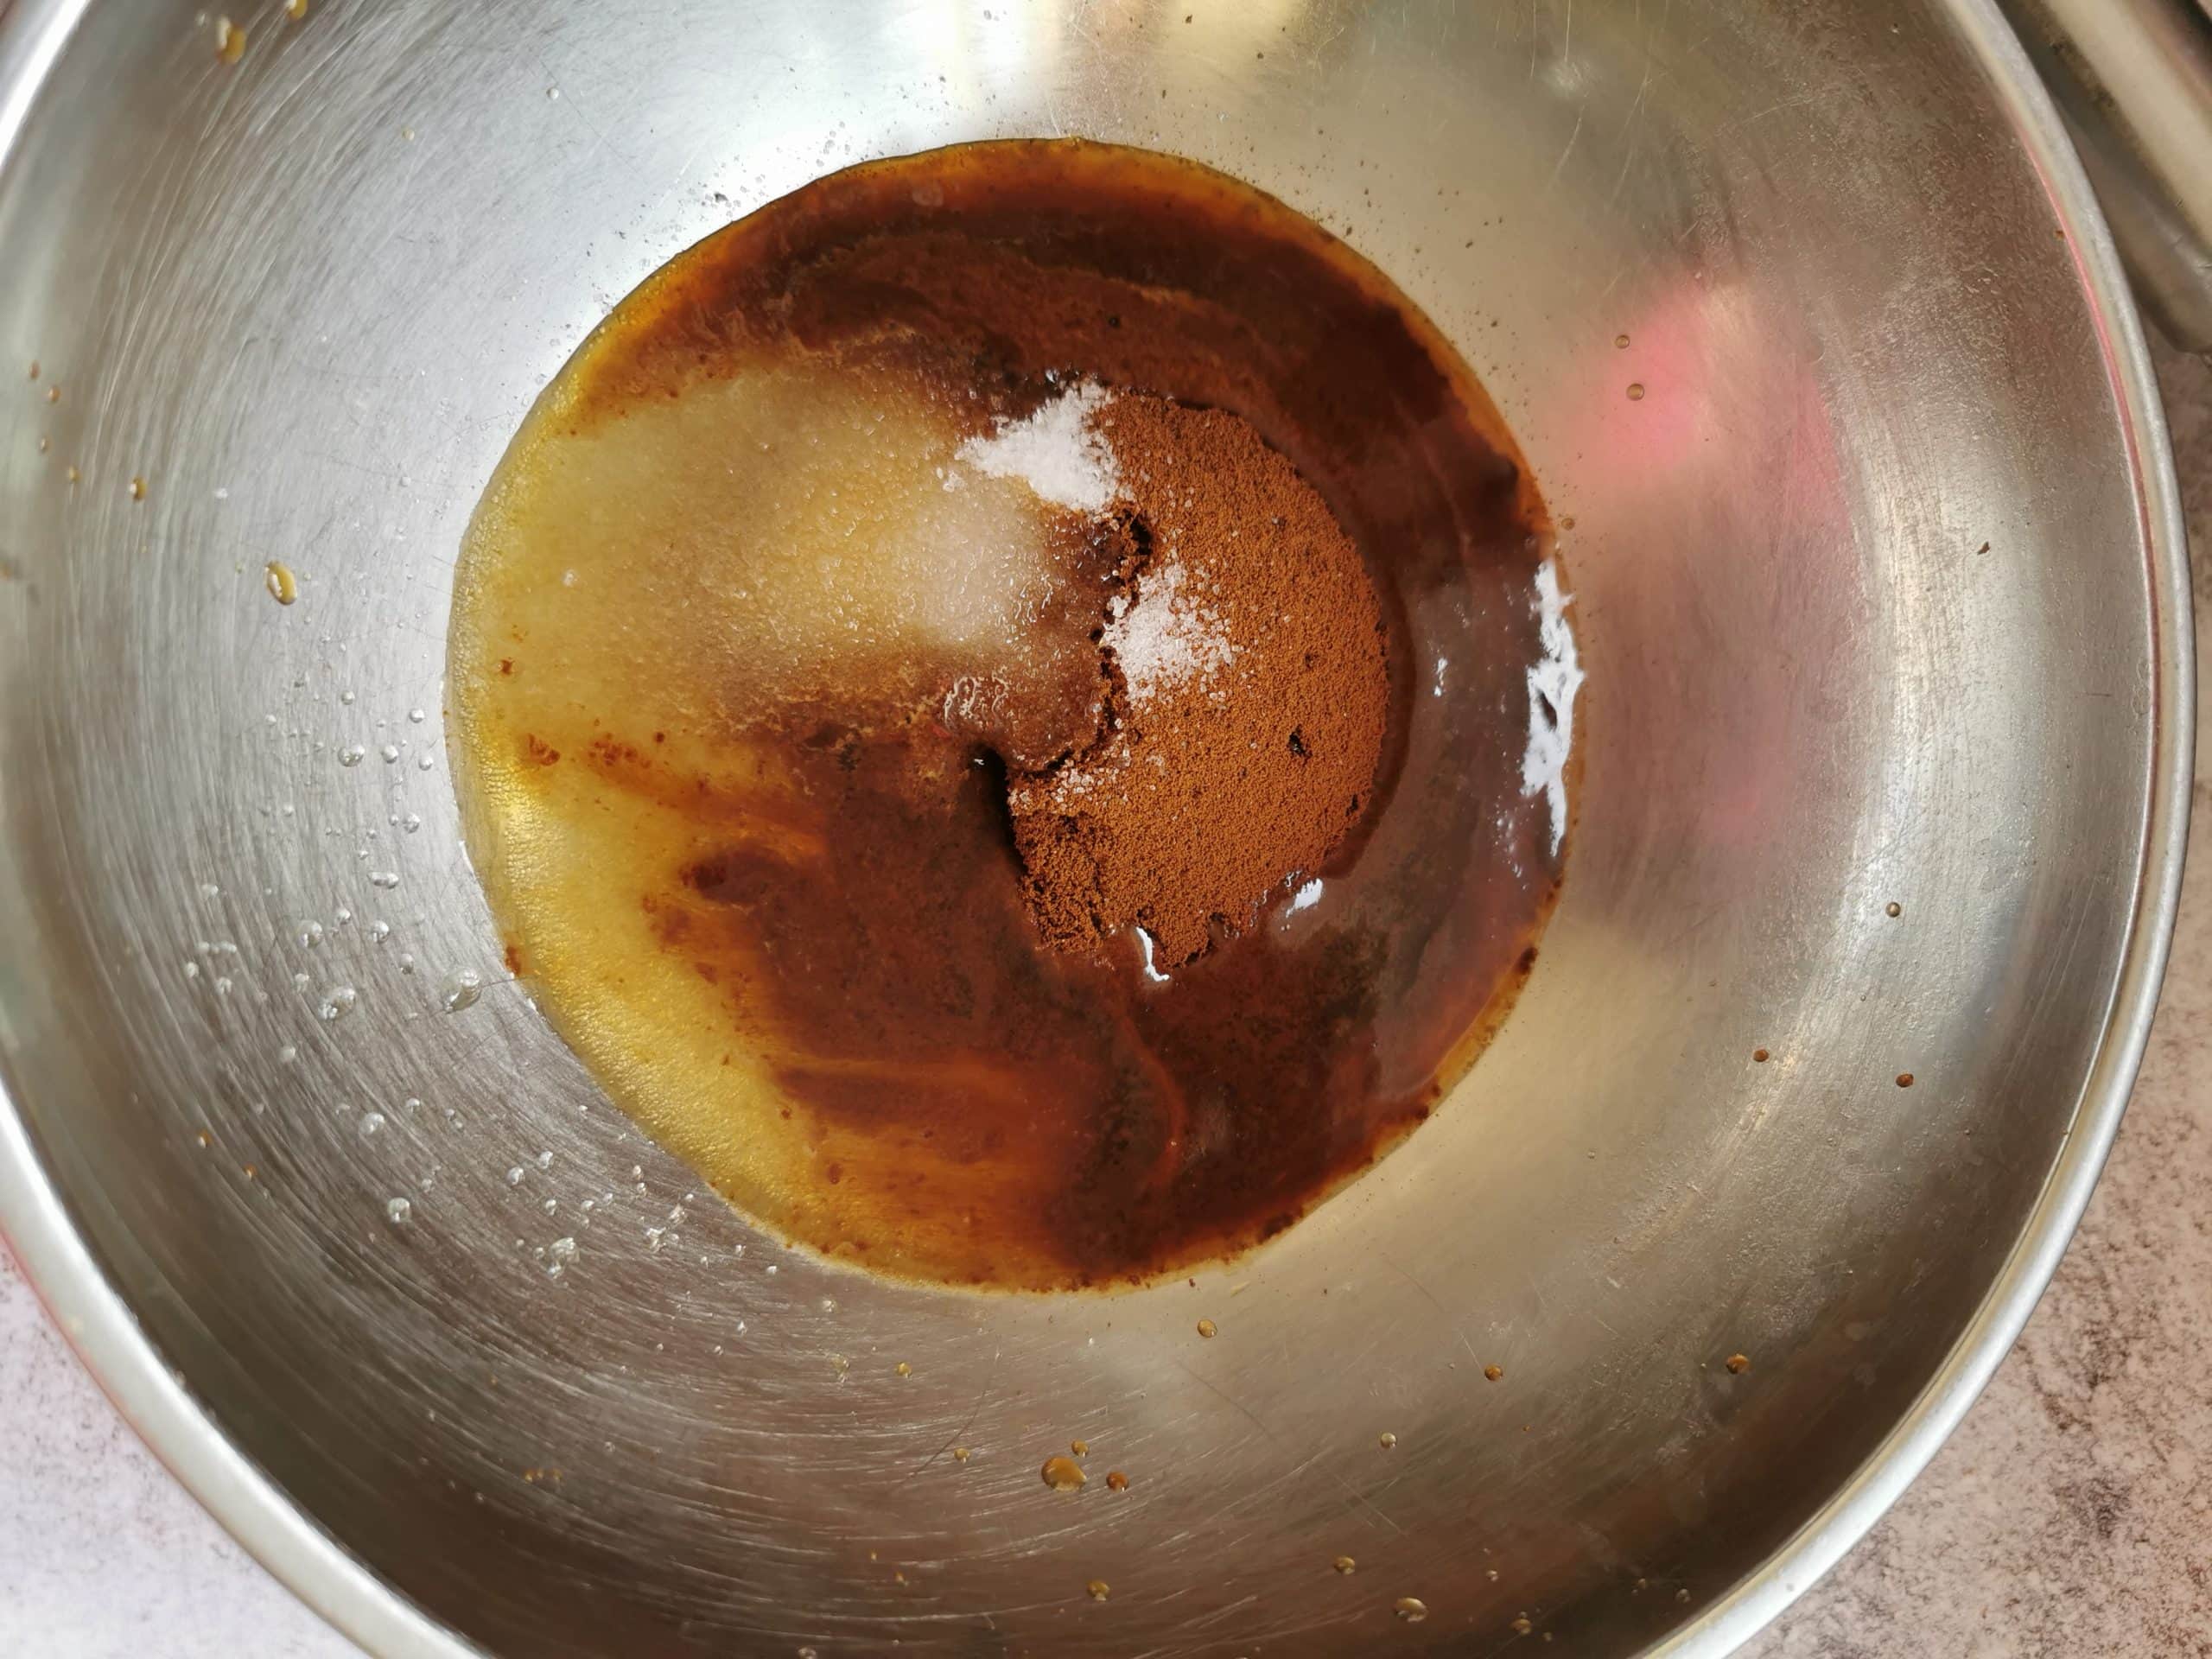 Instant coffee, sugar and hot water in a silver bowl